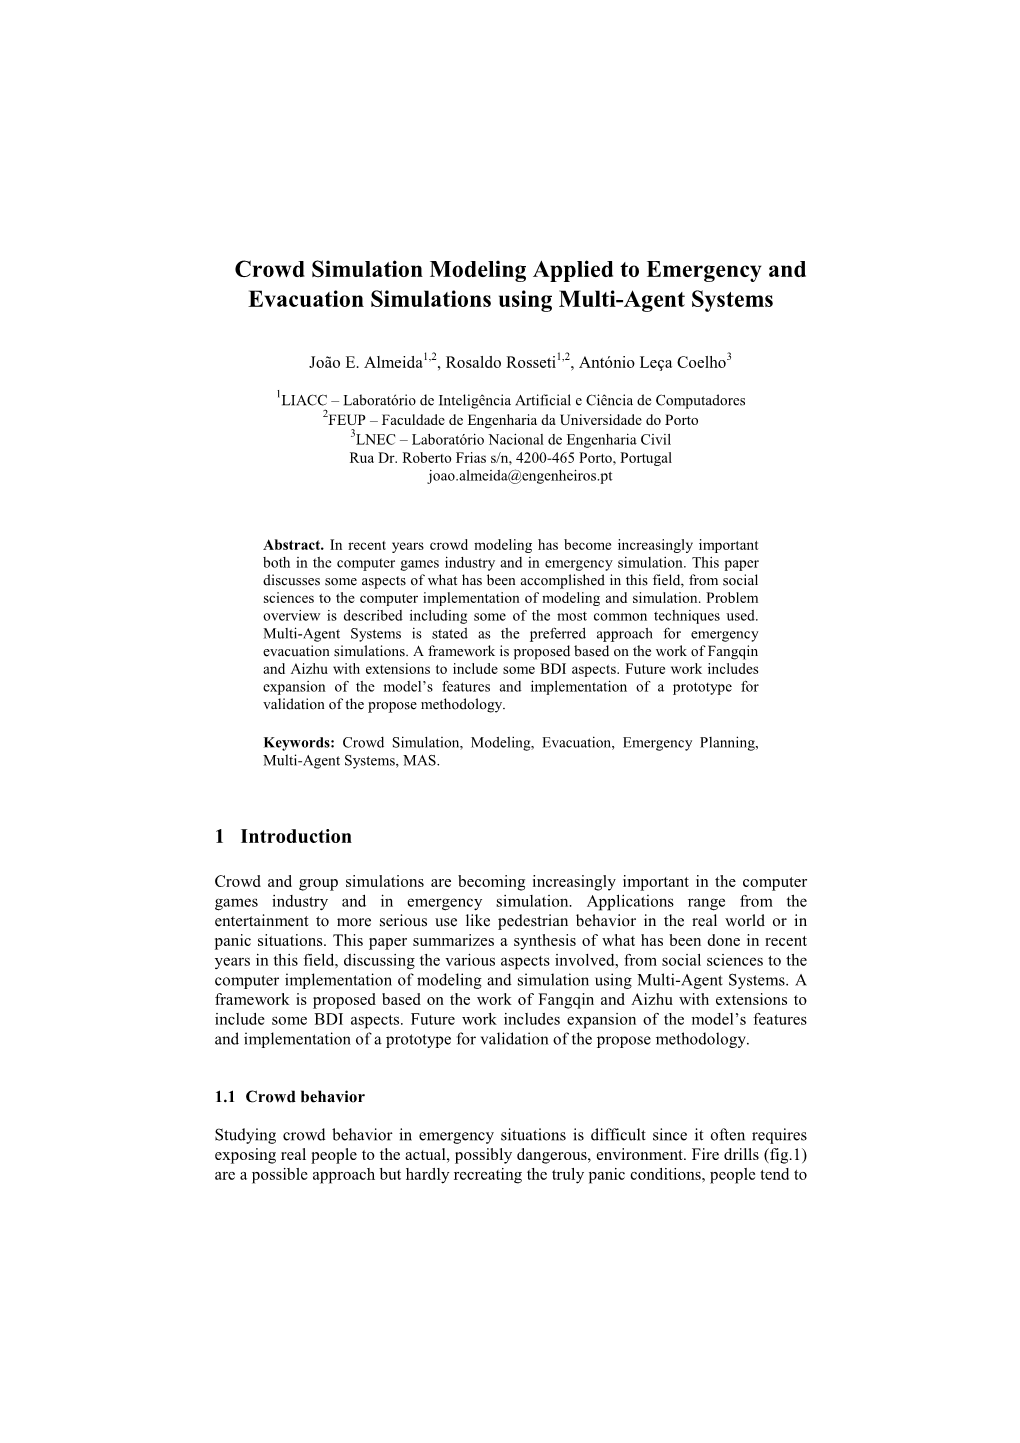 Crowd Simulation Modeling Applied to Emergency and Evacuation Simulations Using Multi-Agent Systems